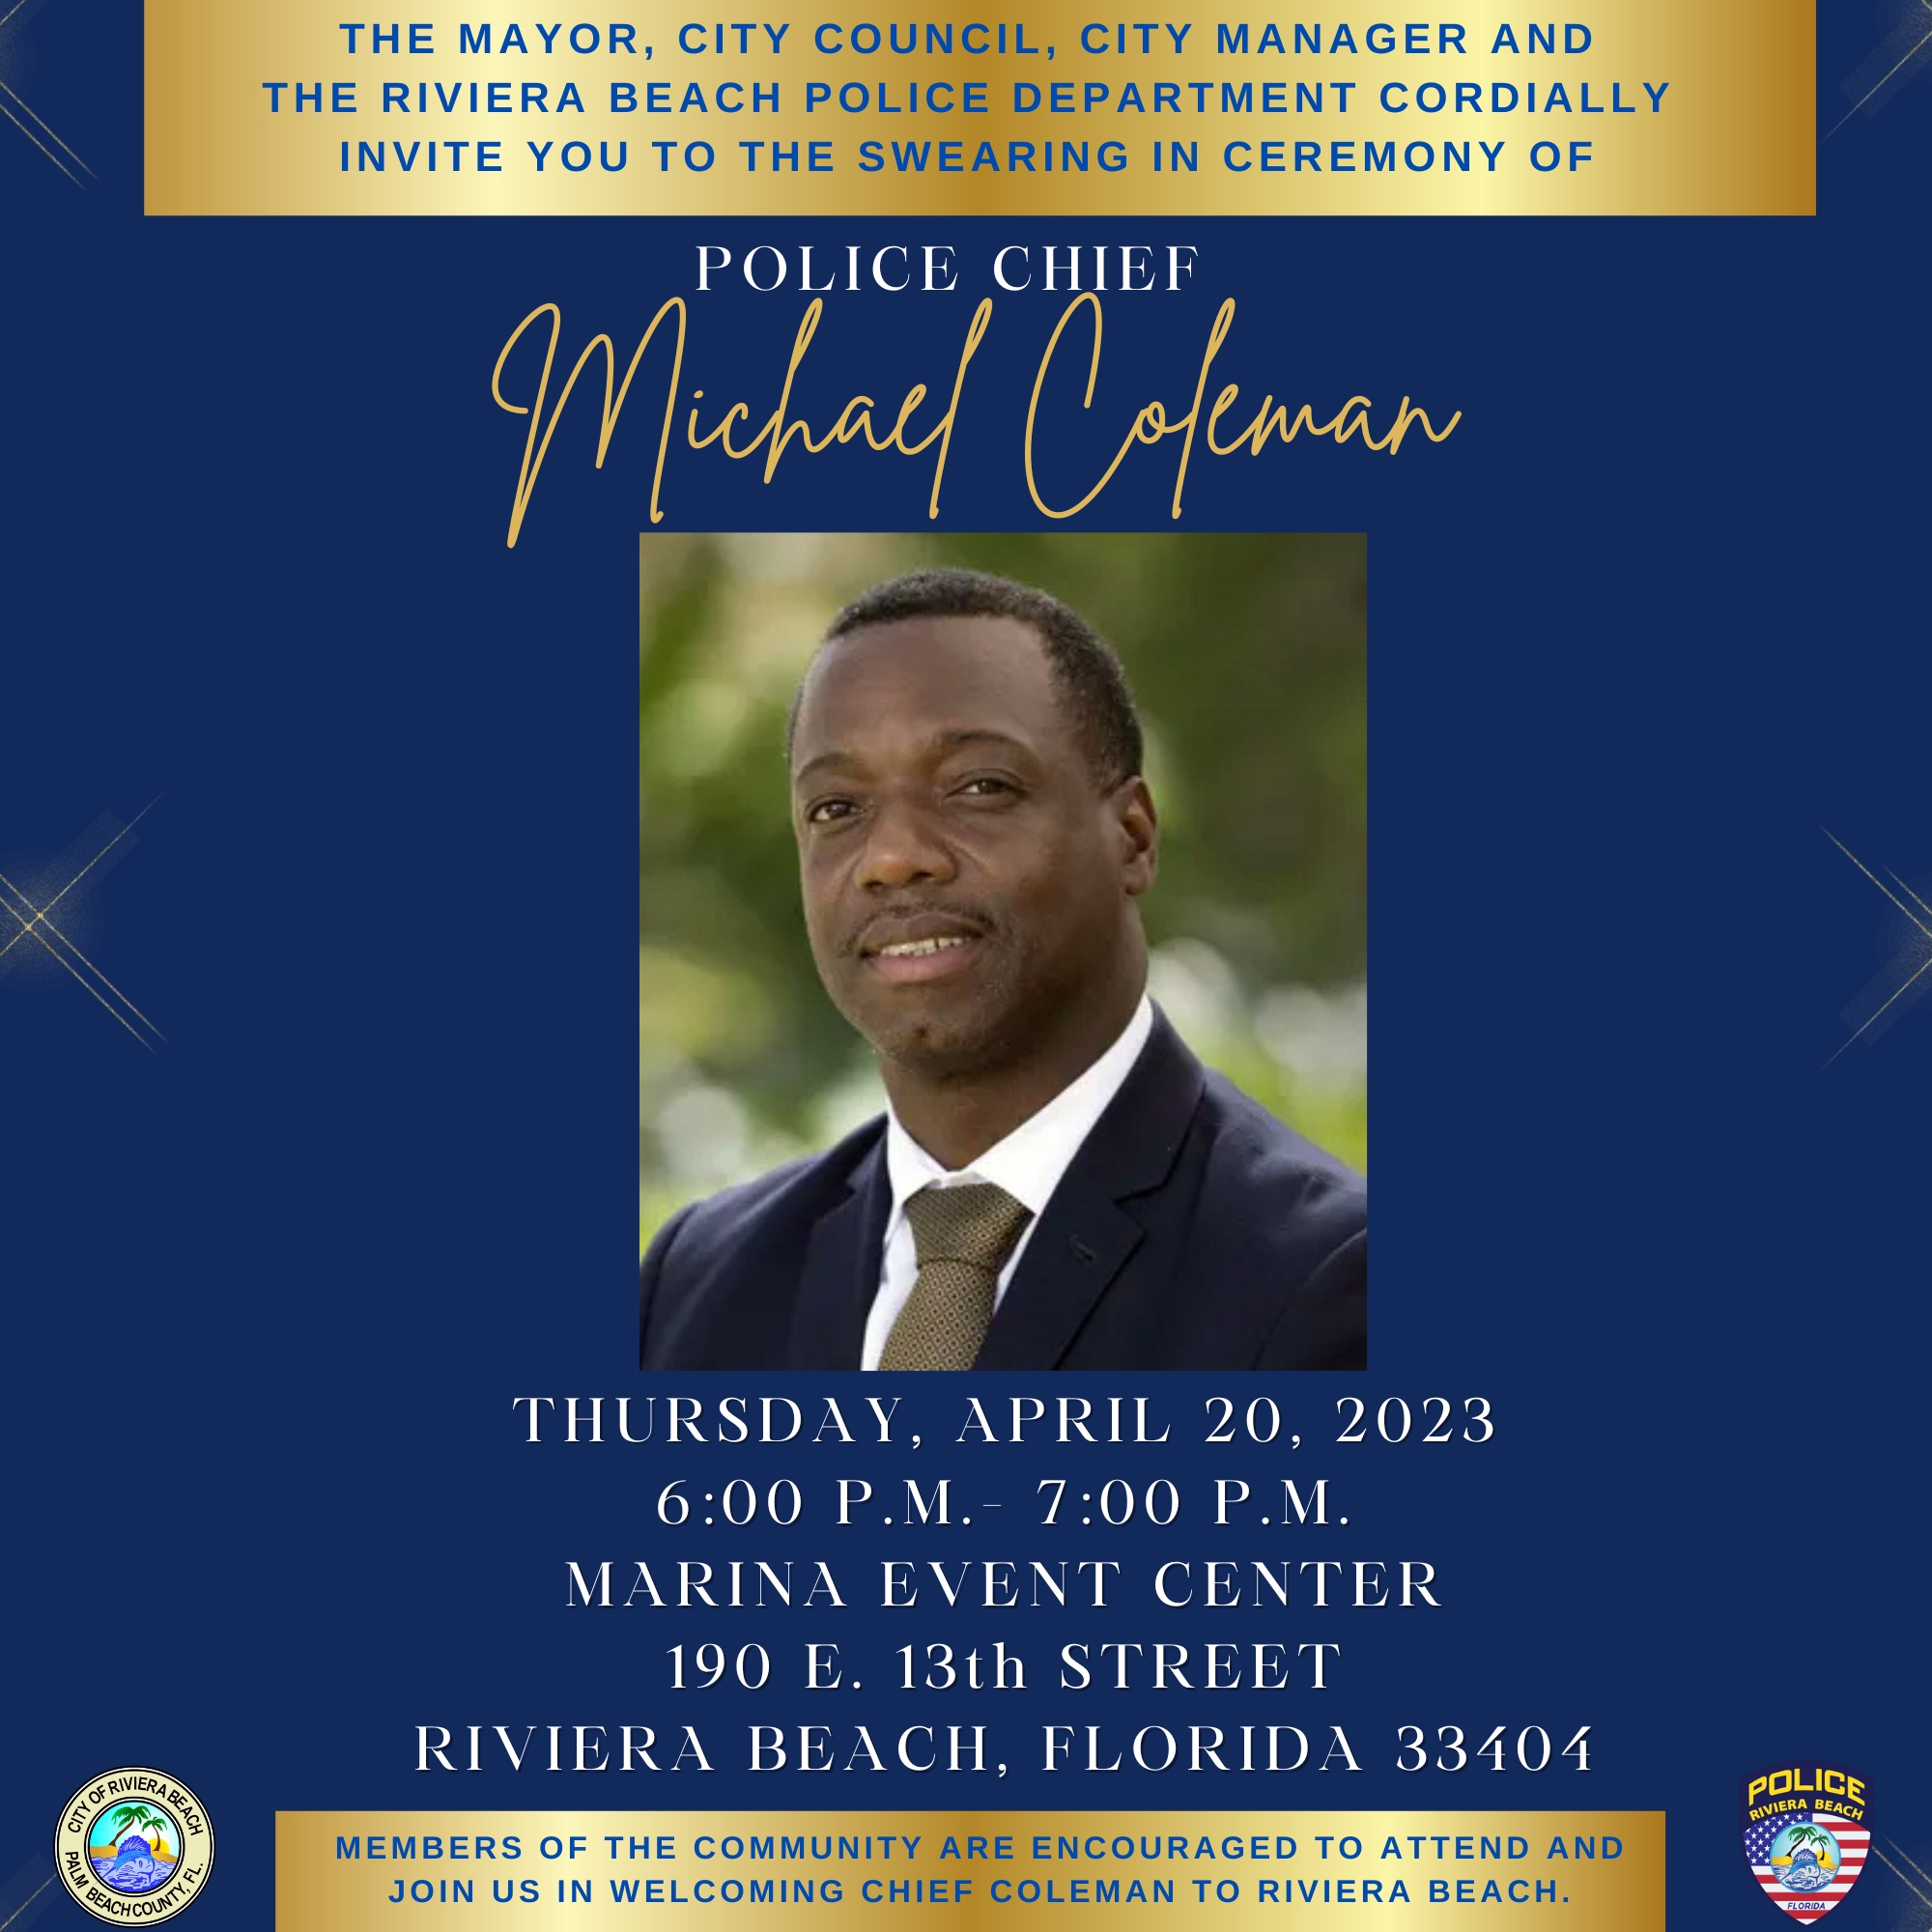 THE MAYOR, CITY COUNCIL, CITY MANAGER AND THE RIVIERA BEACH POLICE DEPARTMENT CORDIALLY INVITE YOU TO THE SWEARING IN CEREMONY OF POLICE CHIEf Michael Coleman THURSDAY, APRIL 20, 2023 6:00 P.M.- 7:00 P.M. MARINA EVENT CENTER 190 E. 13th STREET RIVIERA BEACH, FLORIDA 33404 MEMBERS OF THE COMMUNITY ARE ENCOURAGED TO ATTEND AND JOIN US IN WELCOMING CHIEF COLEMAN TO RIVIERA BEACH.